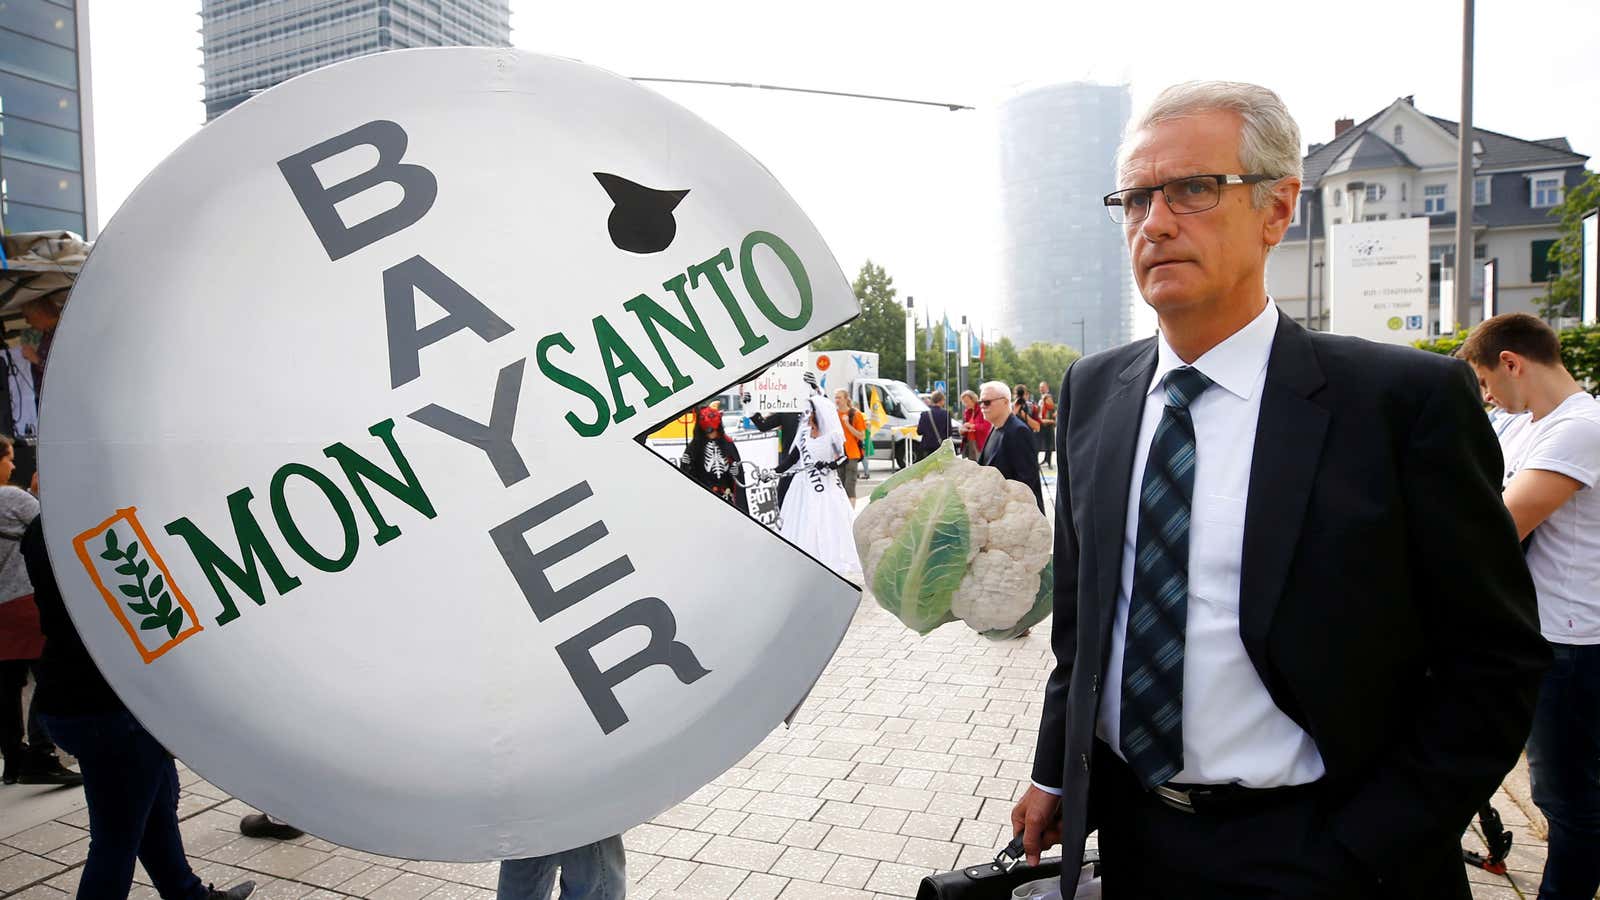 The news of Bayer acquiring Monsanto sparked protests at a Bayer shareholder meeting in May.